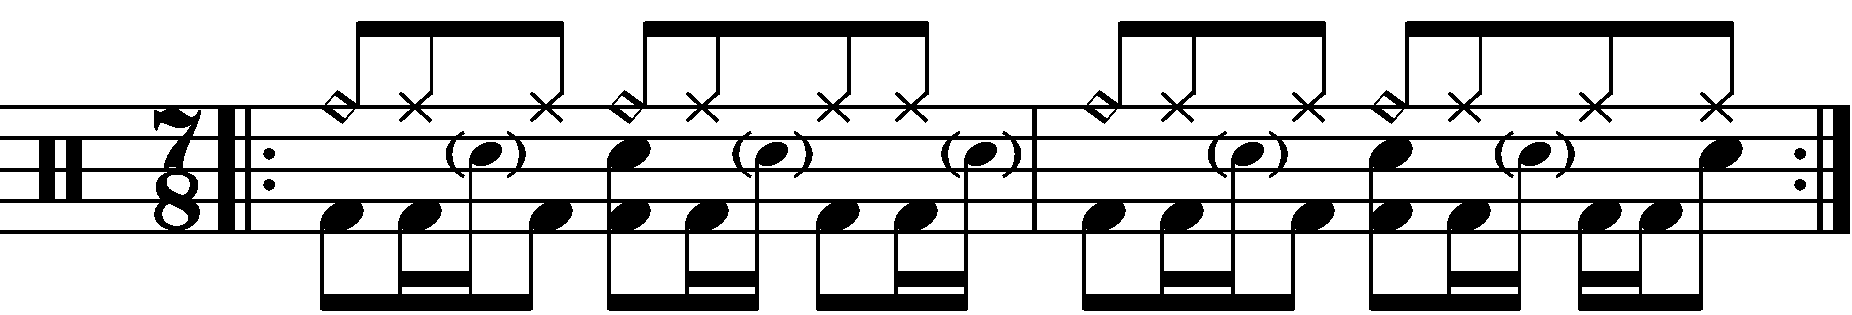 A two bar compound 7/8 groove